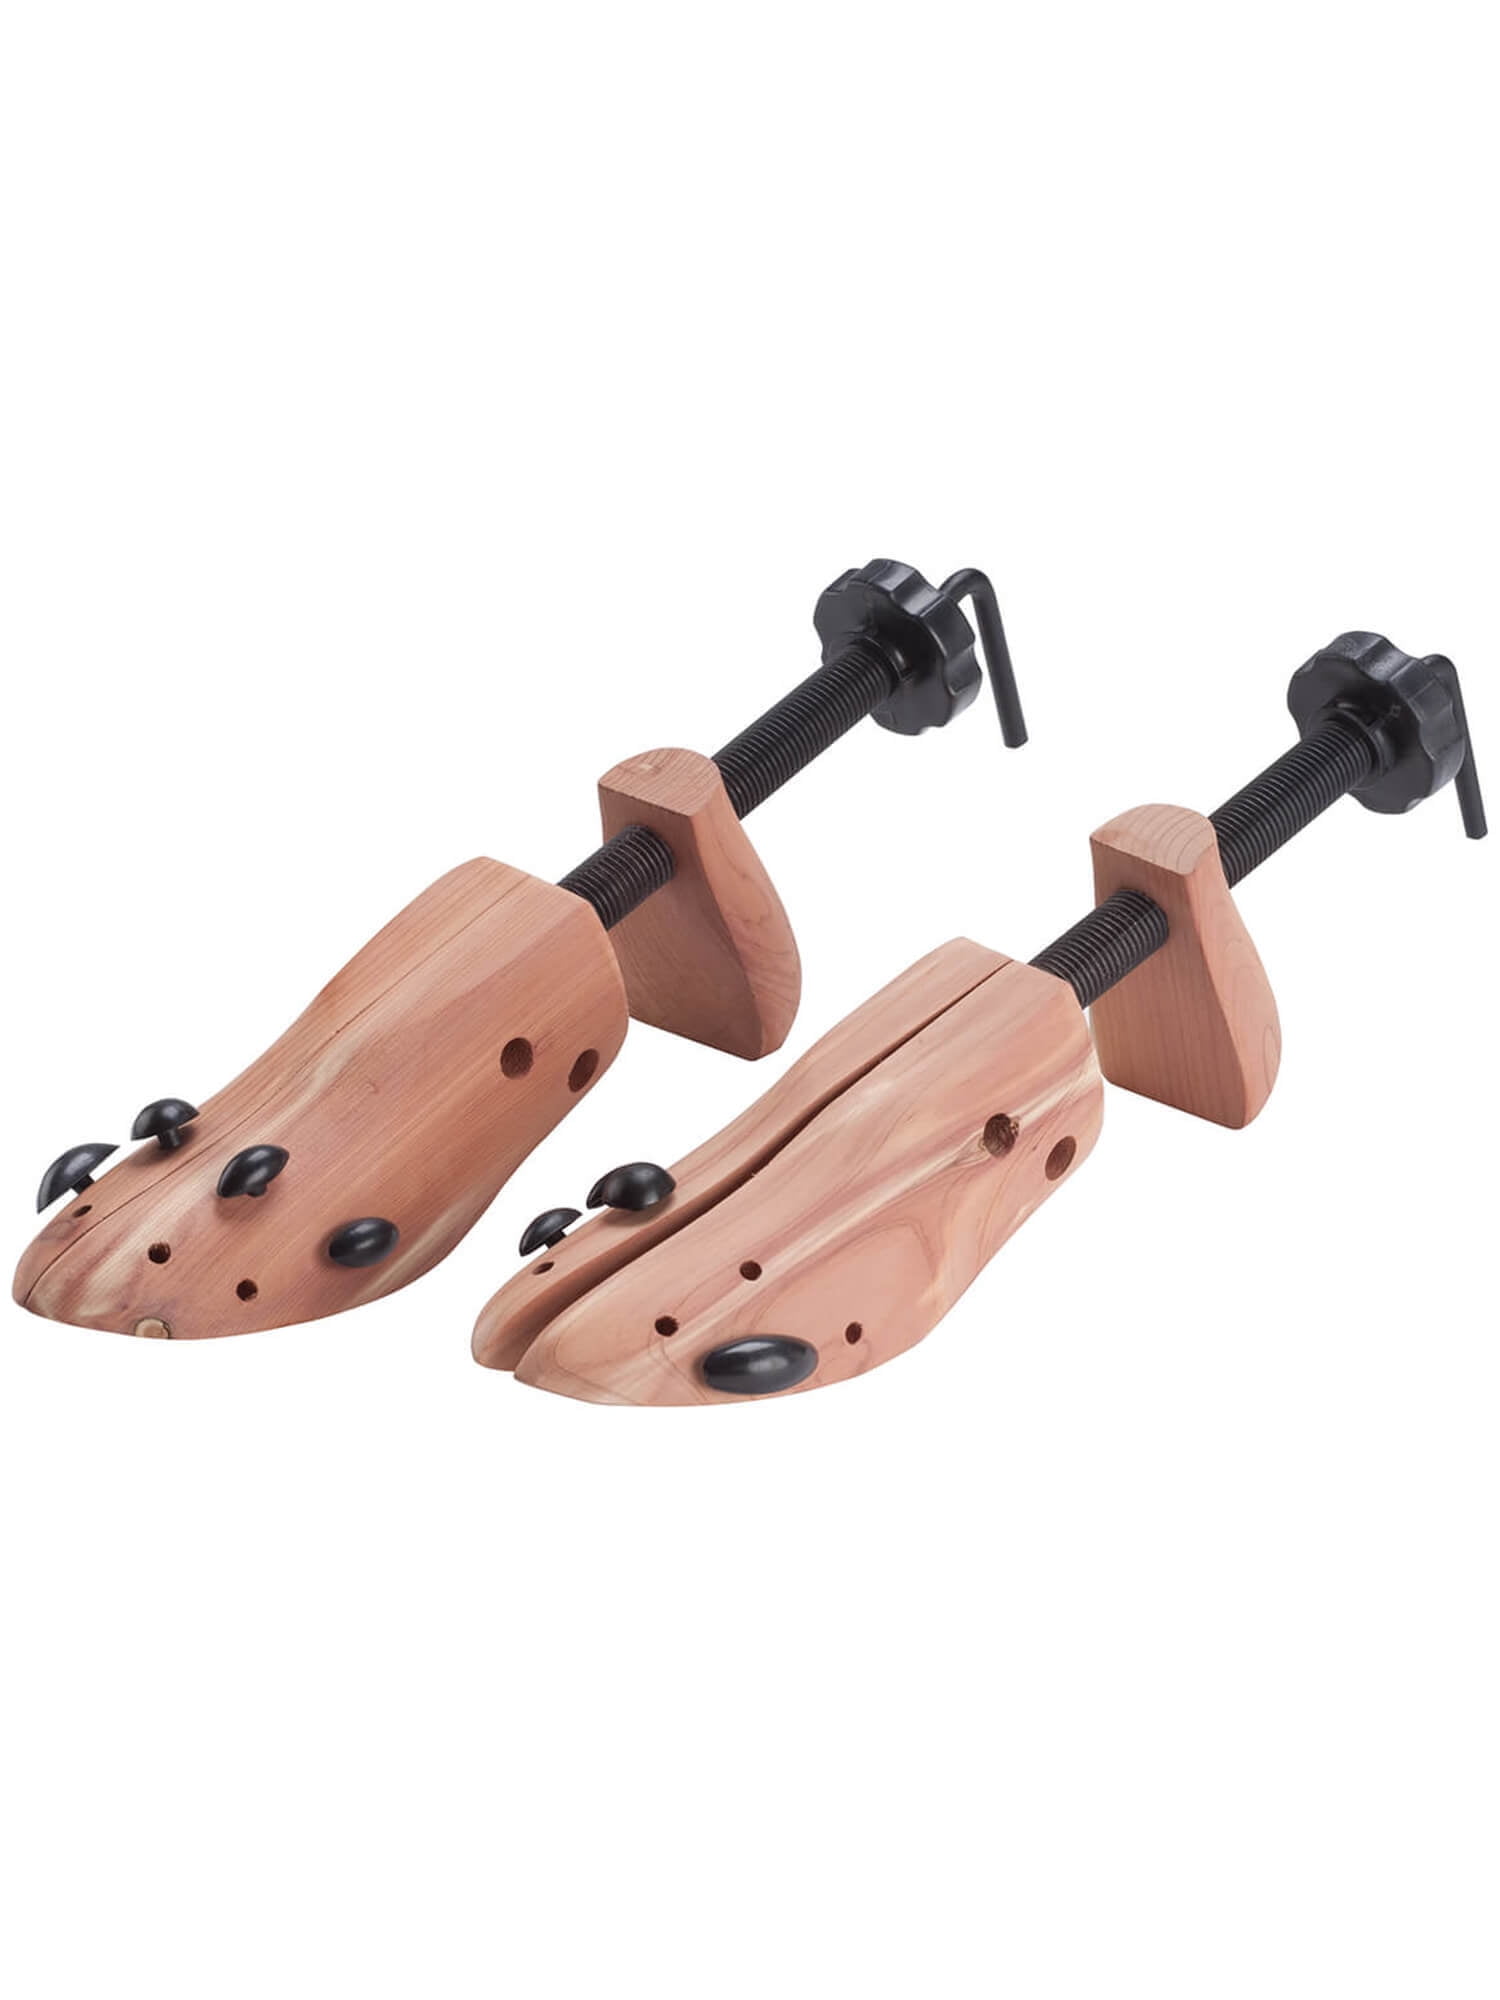 Two-Way Shoe Stretchers with Adjustable Pressure-Relief Pods Sold by the Pair 